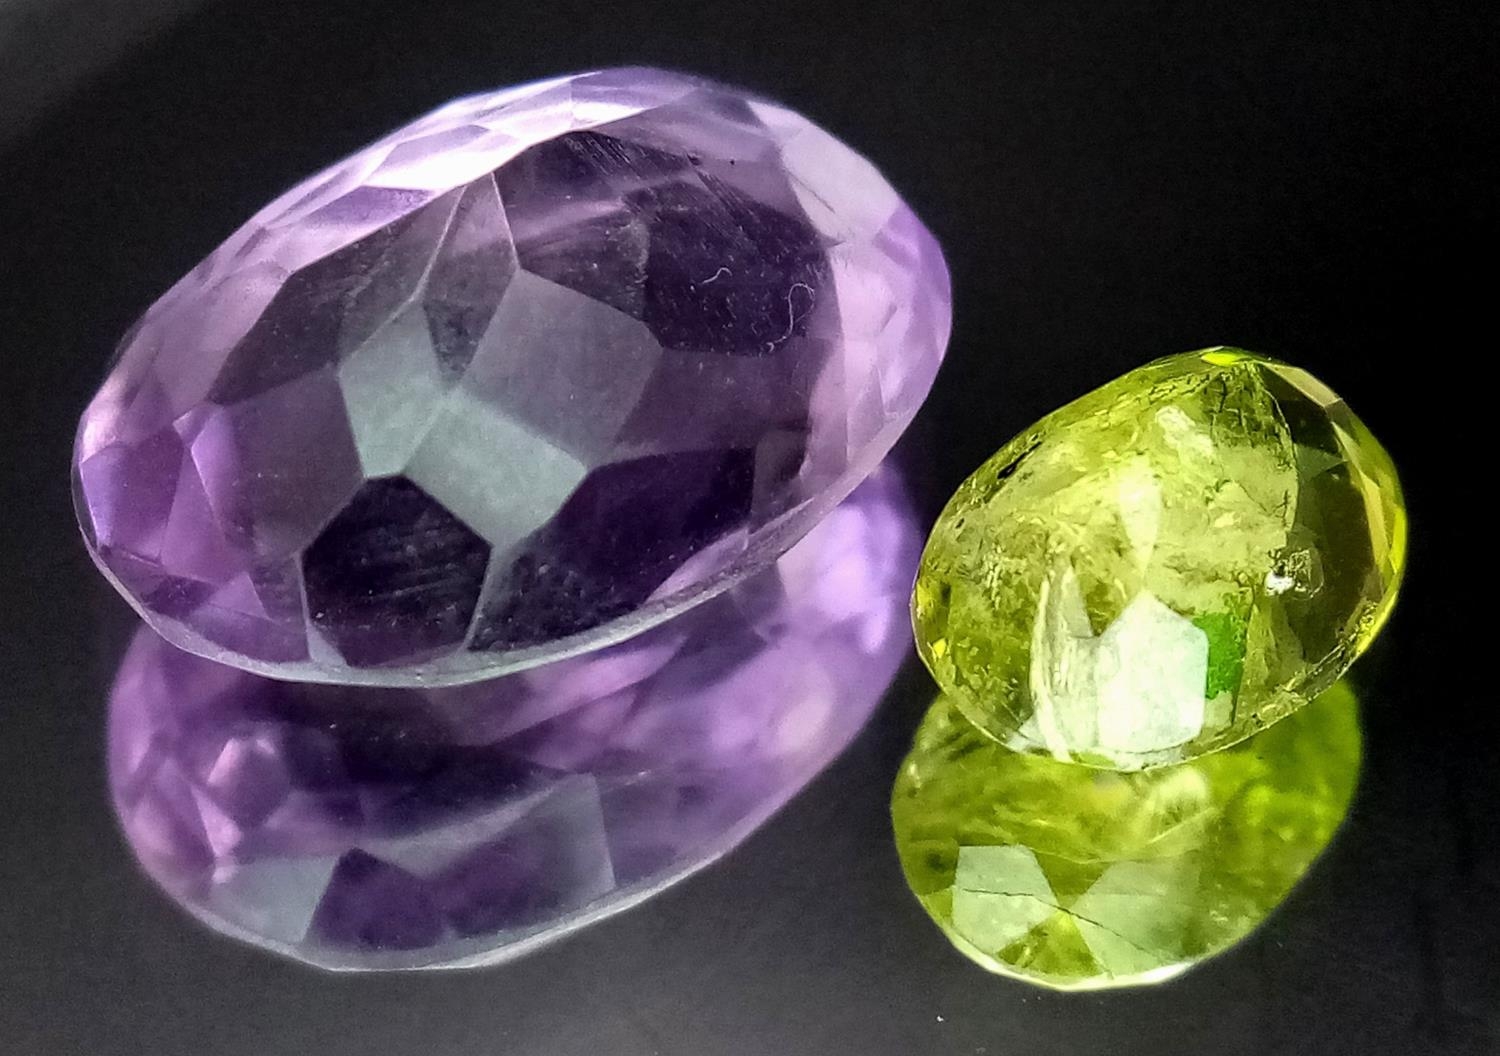 Set of 2 Gems - Peridot of 1.86ct and Amethyst 6.55ct - Both with GFCO certs. - Image 2 of 5